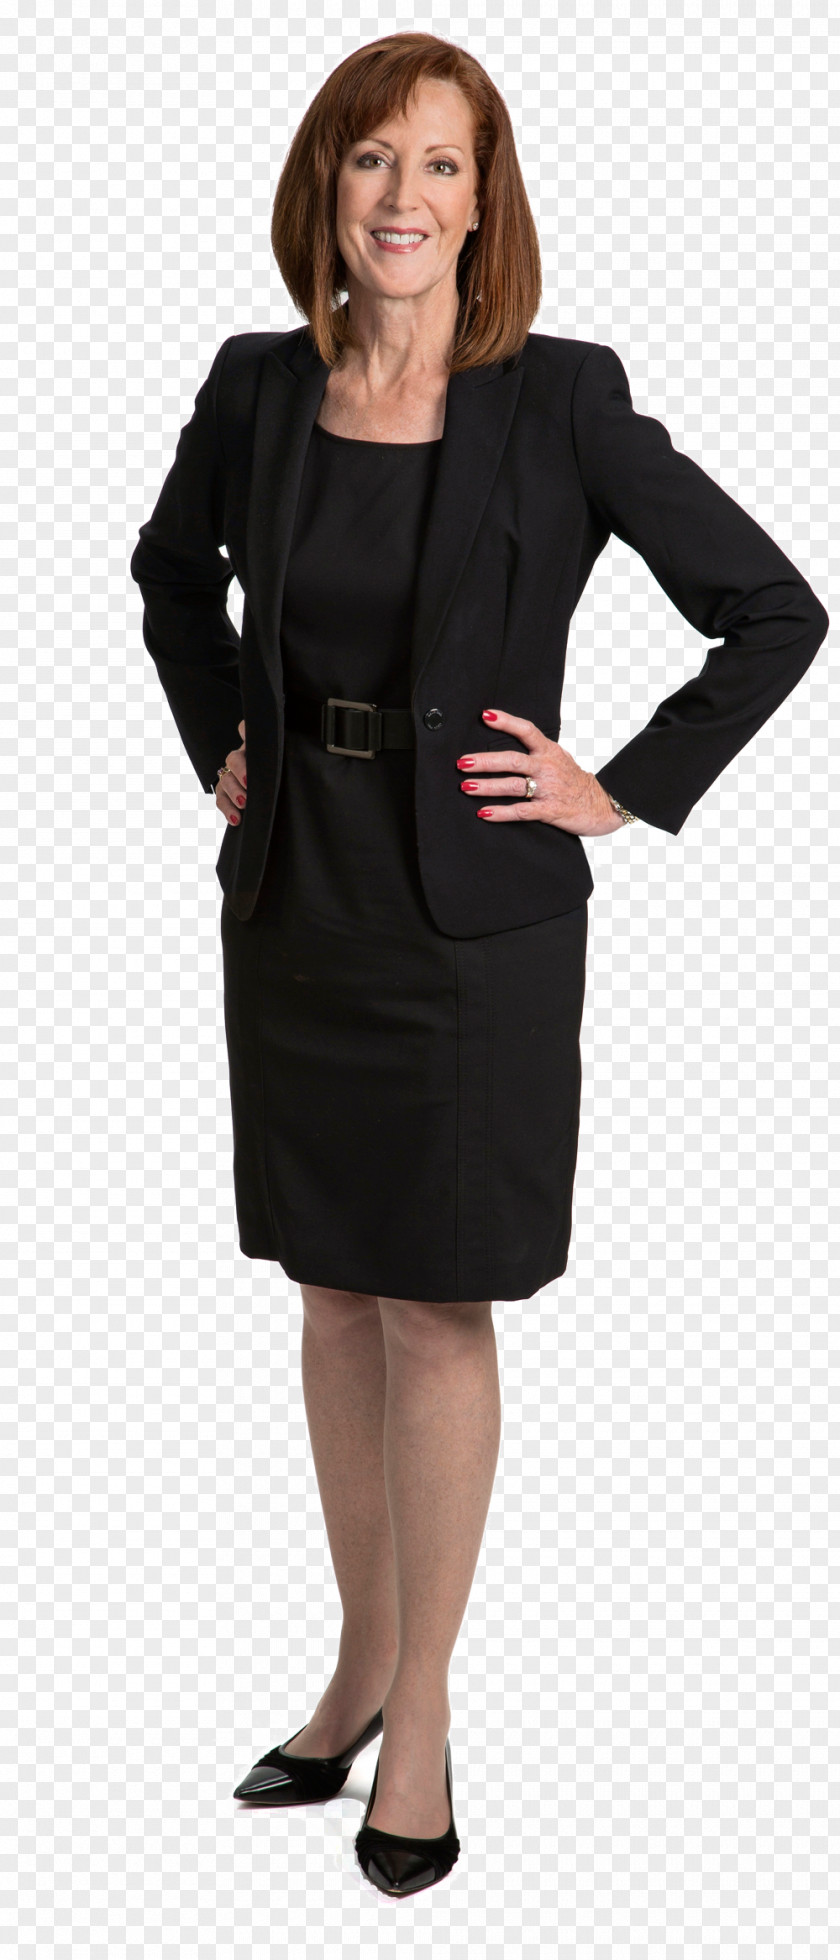 Lawyer Clothing Business Tuxedo Dress PNG